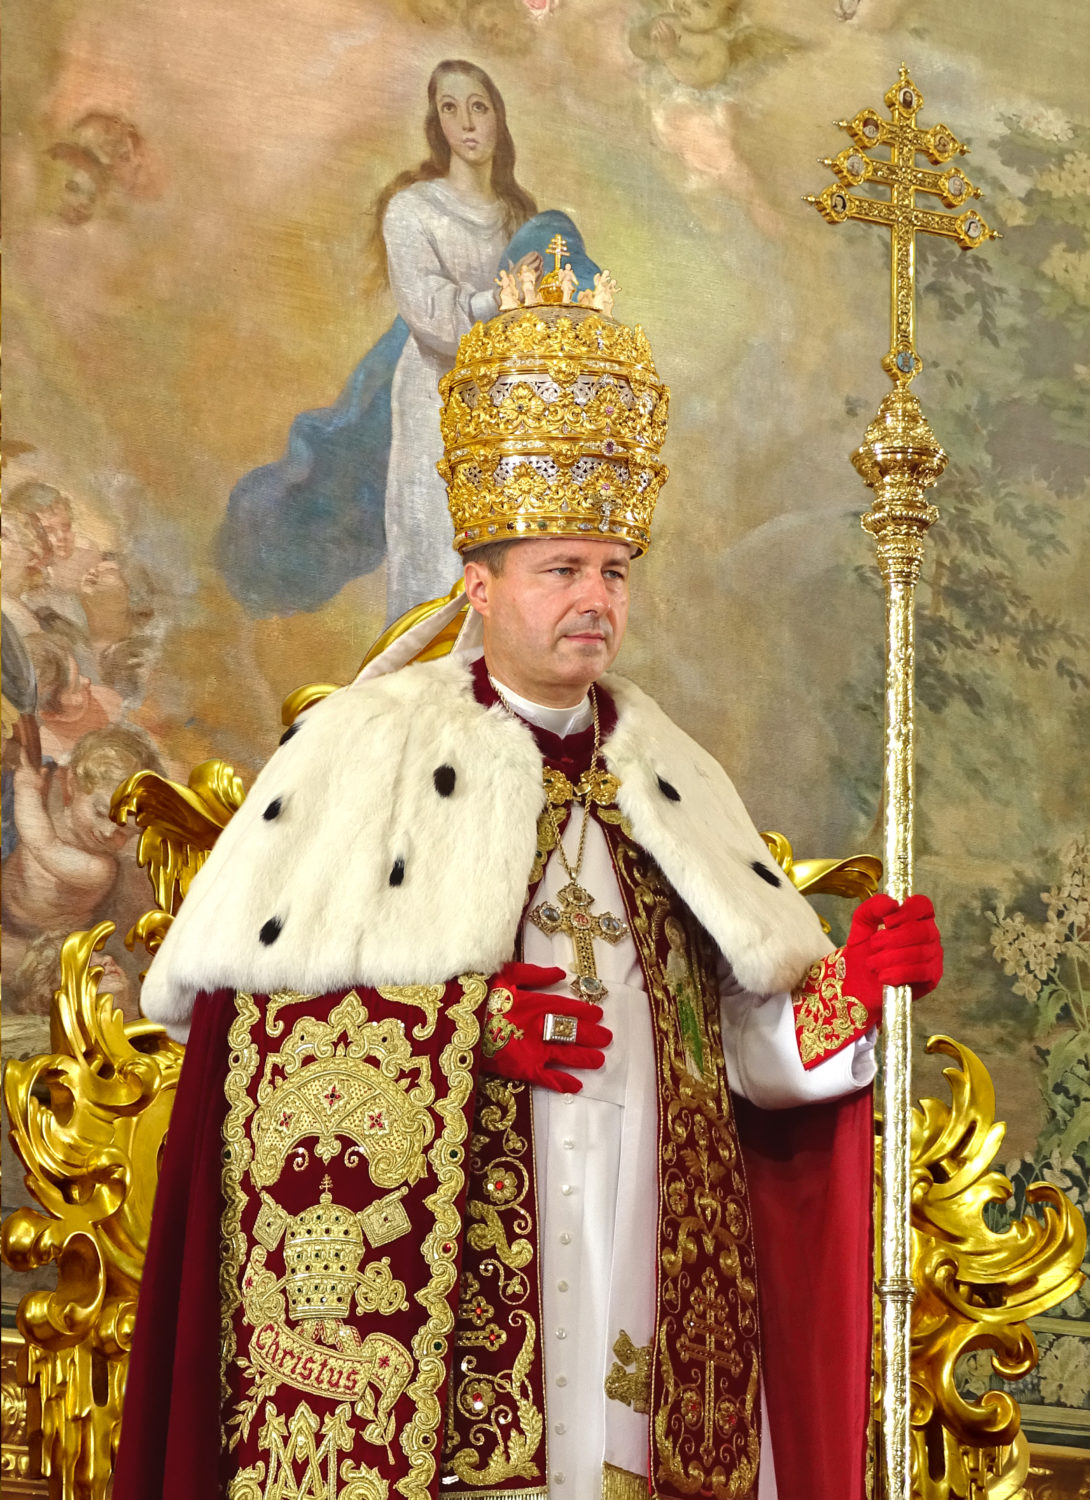 <a href="https://www.palmarianchurch.org/his-holiness-pope-peter-iii/" title="His Holiness Pope Peter III">His Holiness Pope Peter III, <br><i> De Glória Ecclésiæ </i><br><br> Happily Reining<br><br><br> See more</a>